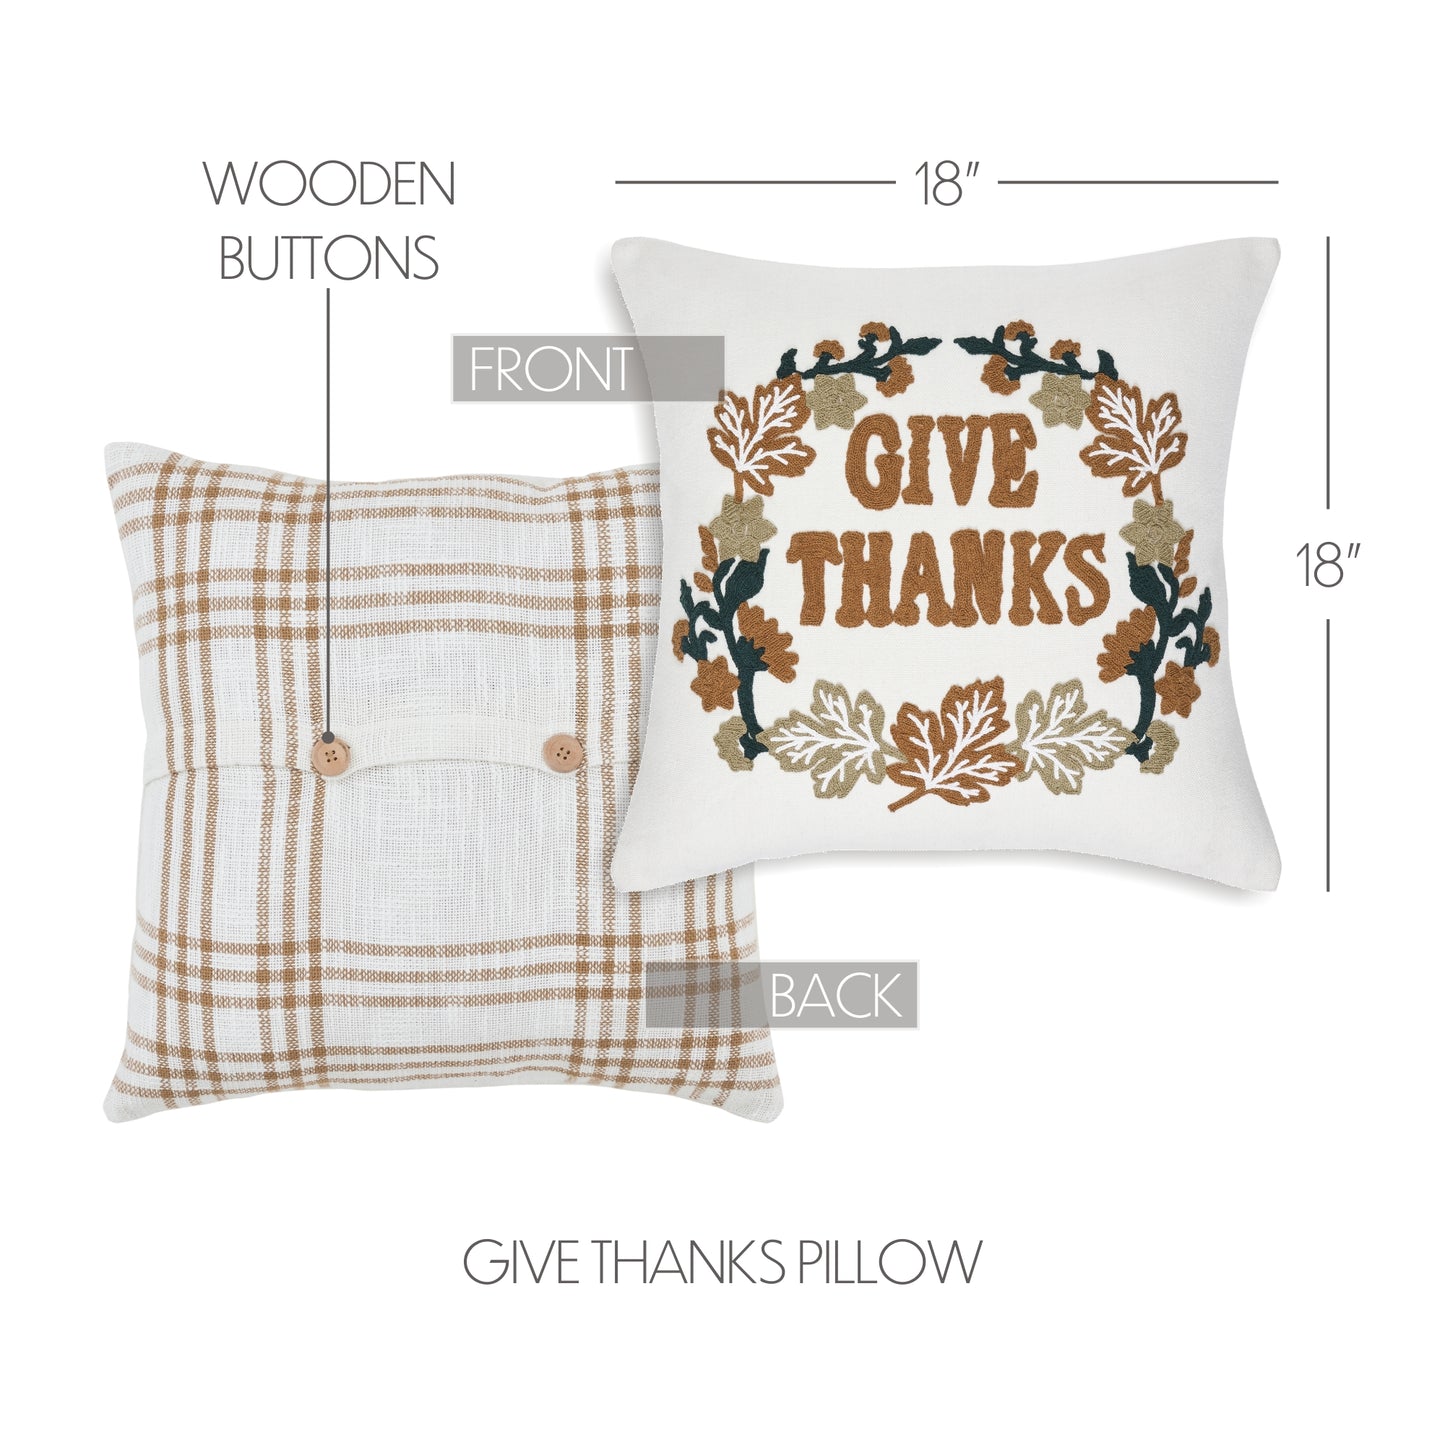 80549-Wheat-Plaid-Give-Thanks-Pillow-18x18-image-1